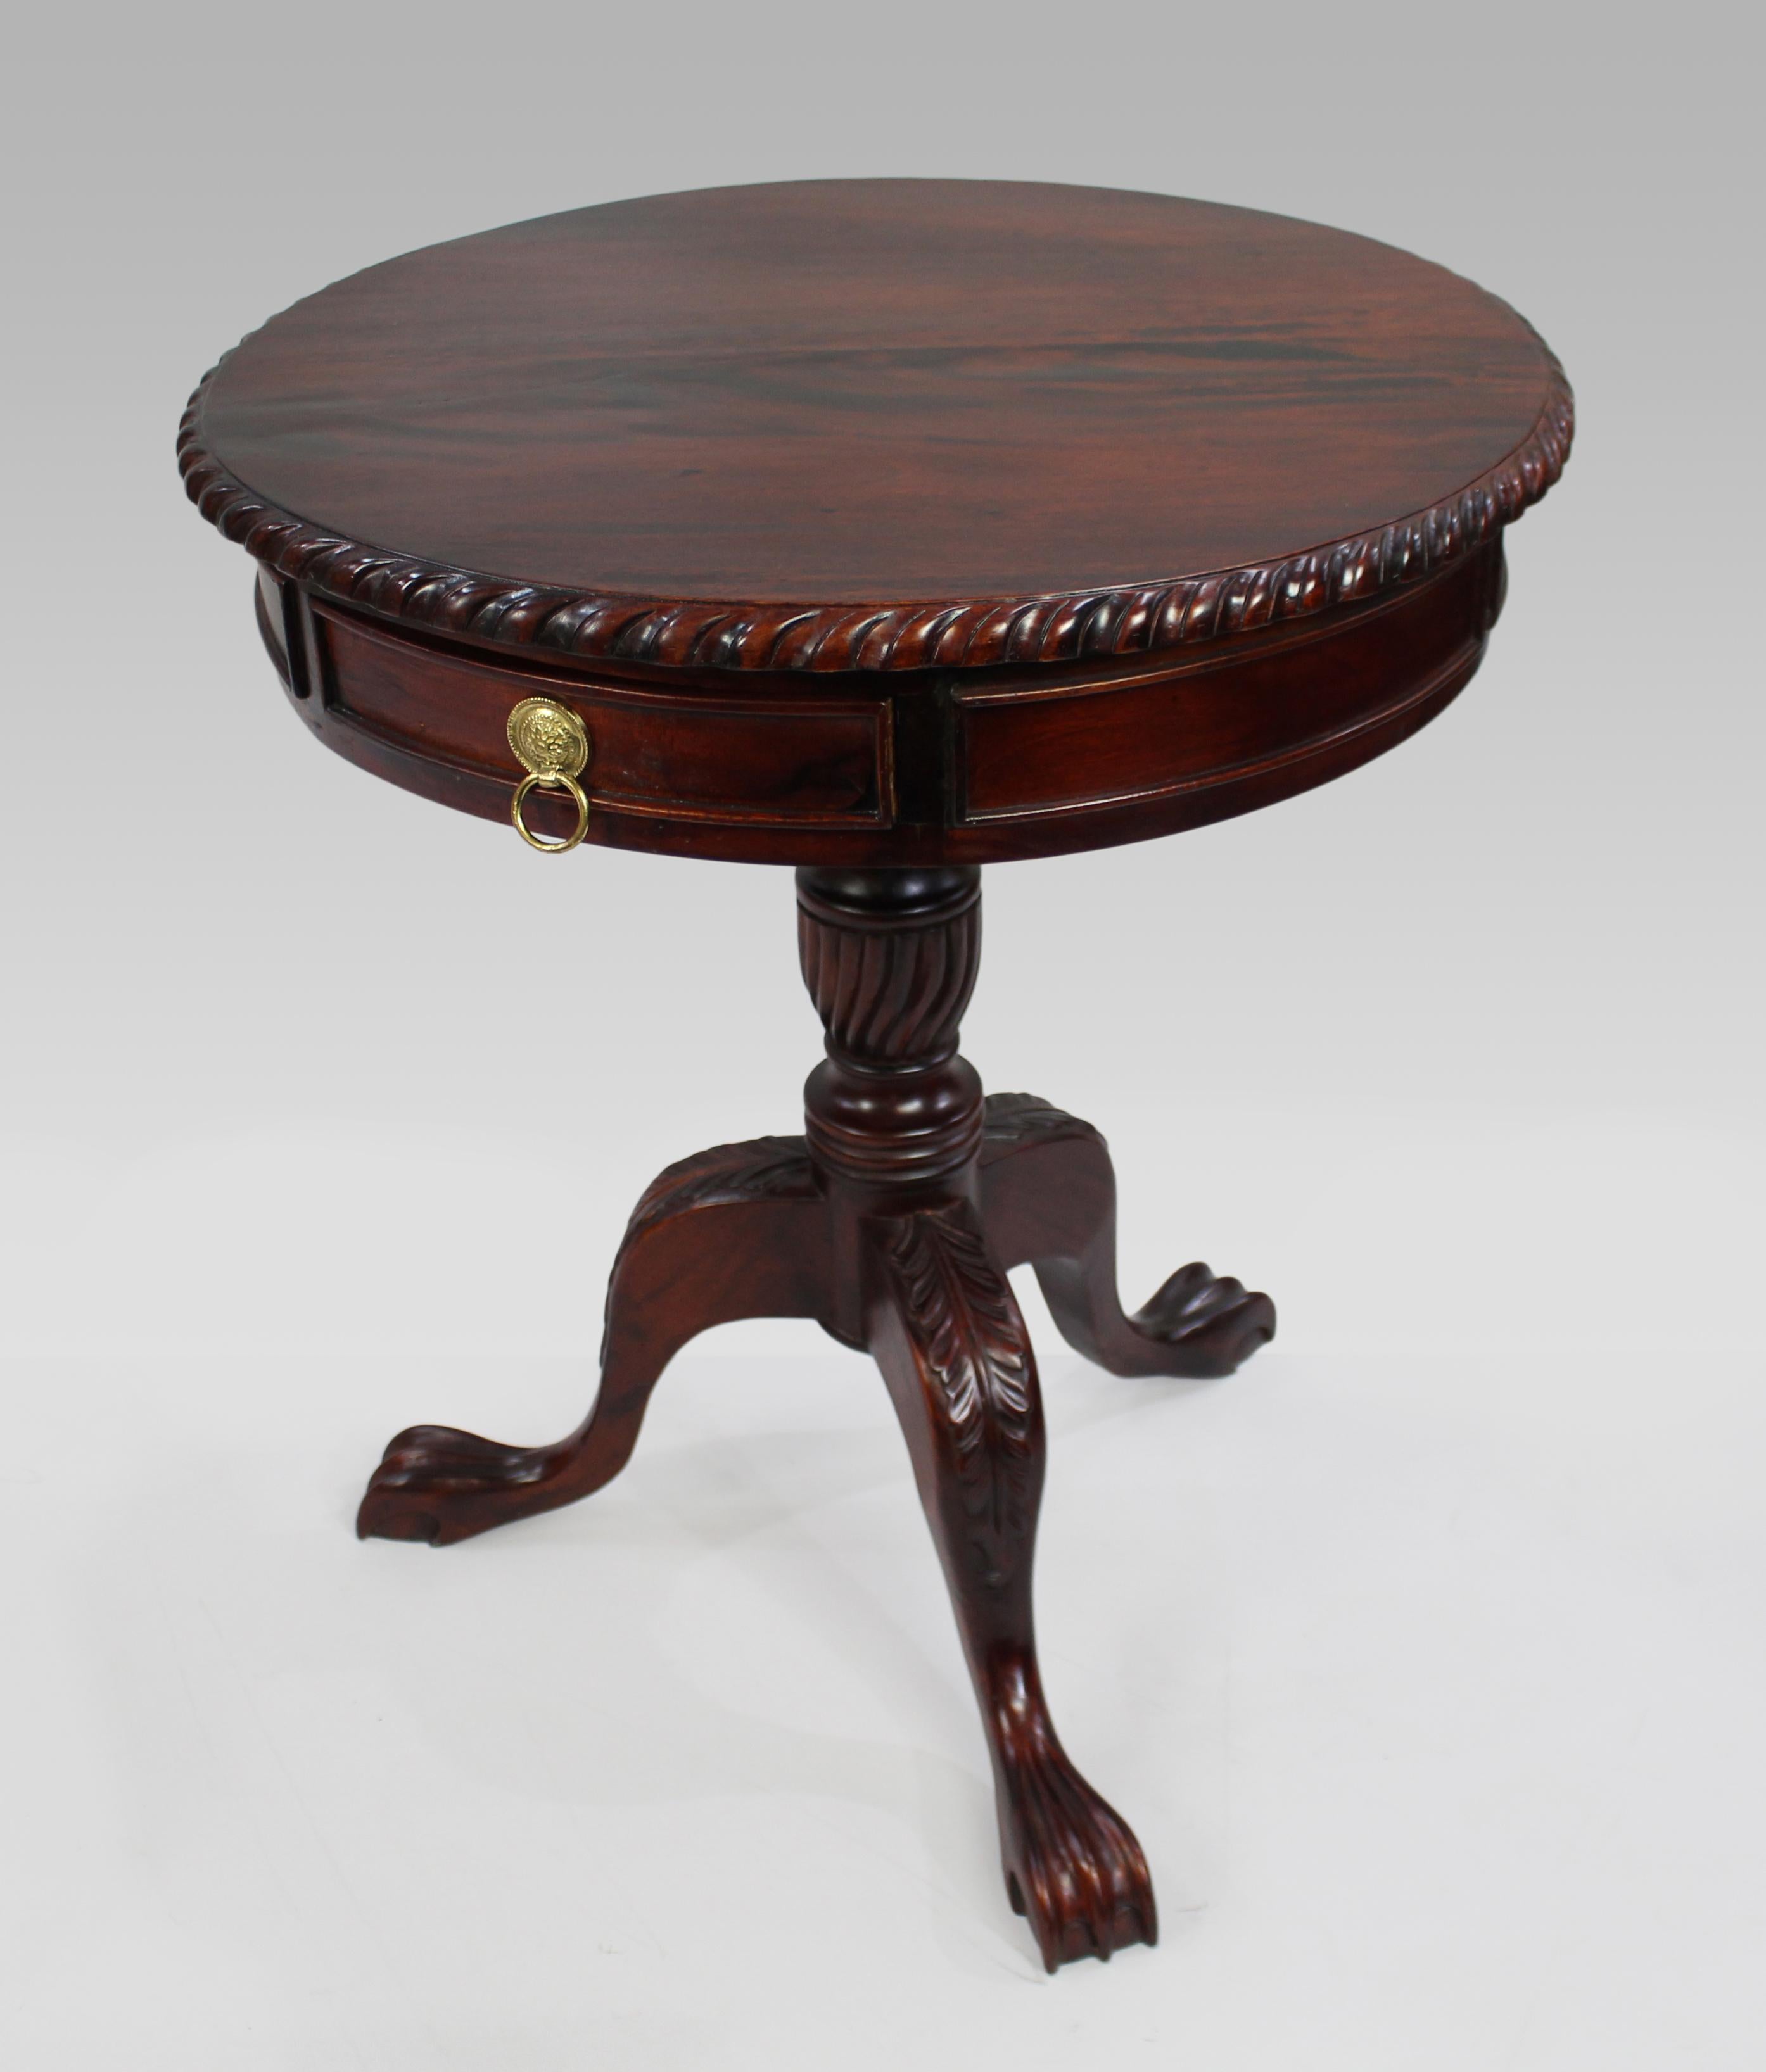 Carved mahogany drum table


Mahogany. Late 20th century. 

Drum table with rope edged top.

Two drawers with brass handles to frieze. 

Tripod base with claw feet. 

Measures: Width: 58 cm. Height: 70 cm

Good condition. Sound